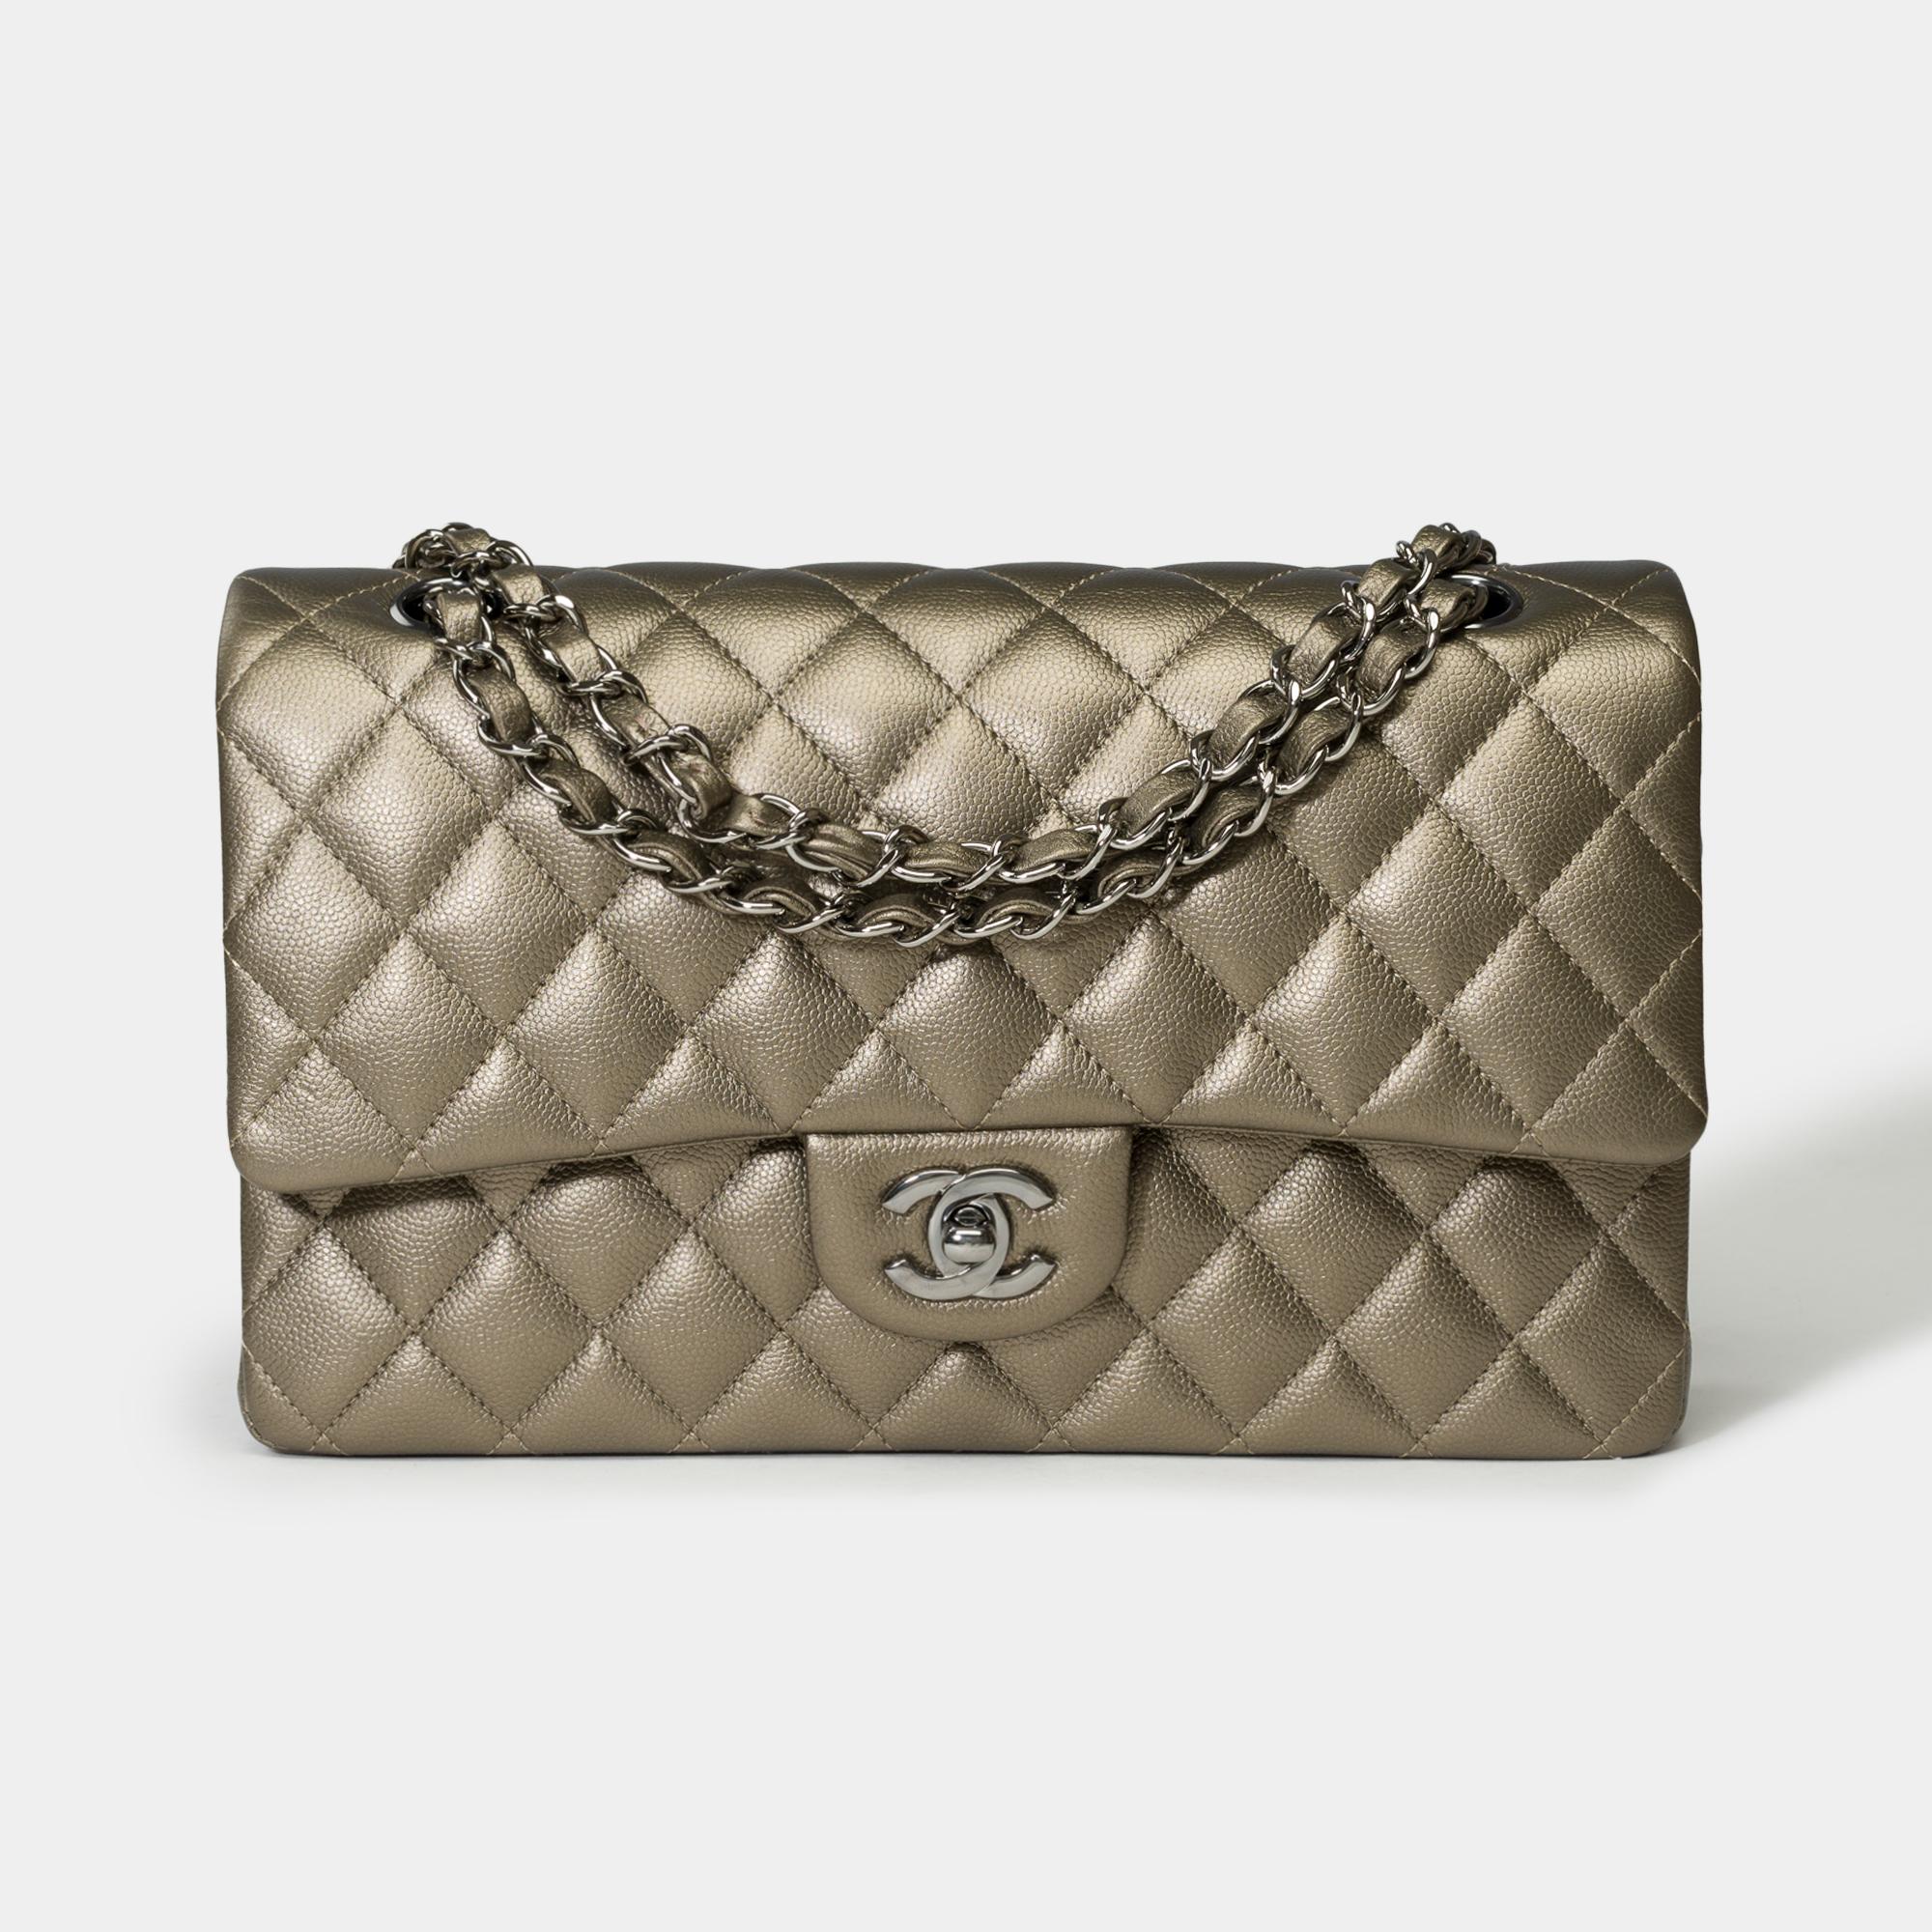 Exceptional​ ​&​ ​Rare​ ​Chanel​ ​Timeless​ ​Medium​ ​25cm​ ​double​ ​flap​ ​shoulder​ ​bag​ ​in​ ​Bronze​ ​quilted​ ​caviar​ ​leather,​ ​silver​ ​metal​ ​trim,​ ​a​ ​chain​ ​handle​ ​in​ ​silver​ ​metal​ ​interlaced​ ​with​ ​bronze​ ​leather​